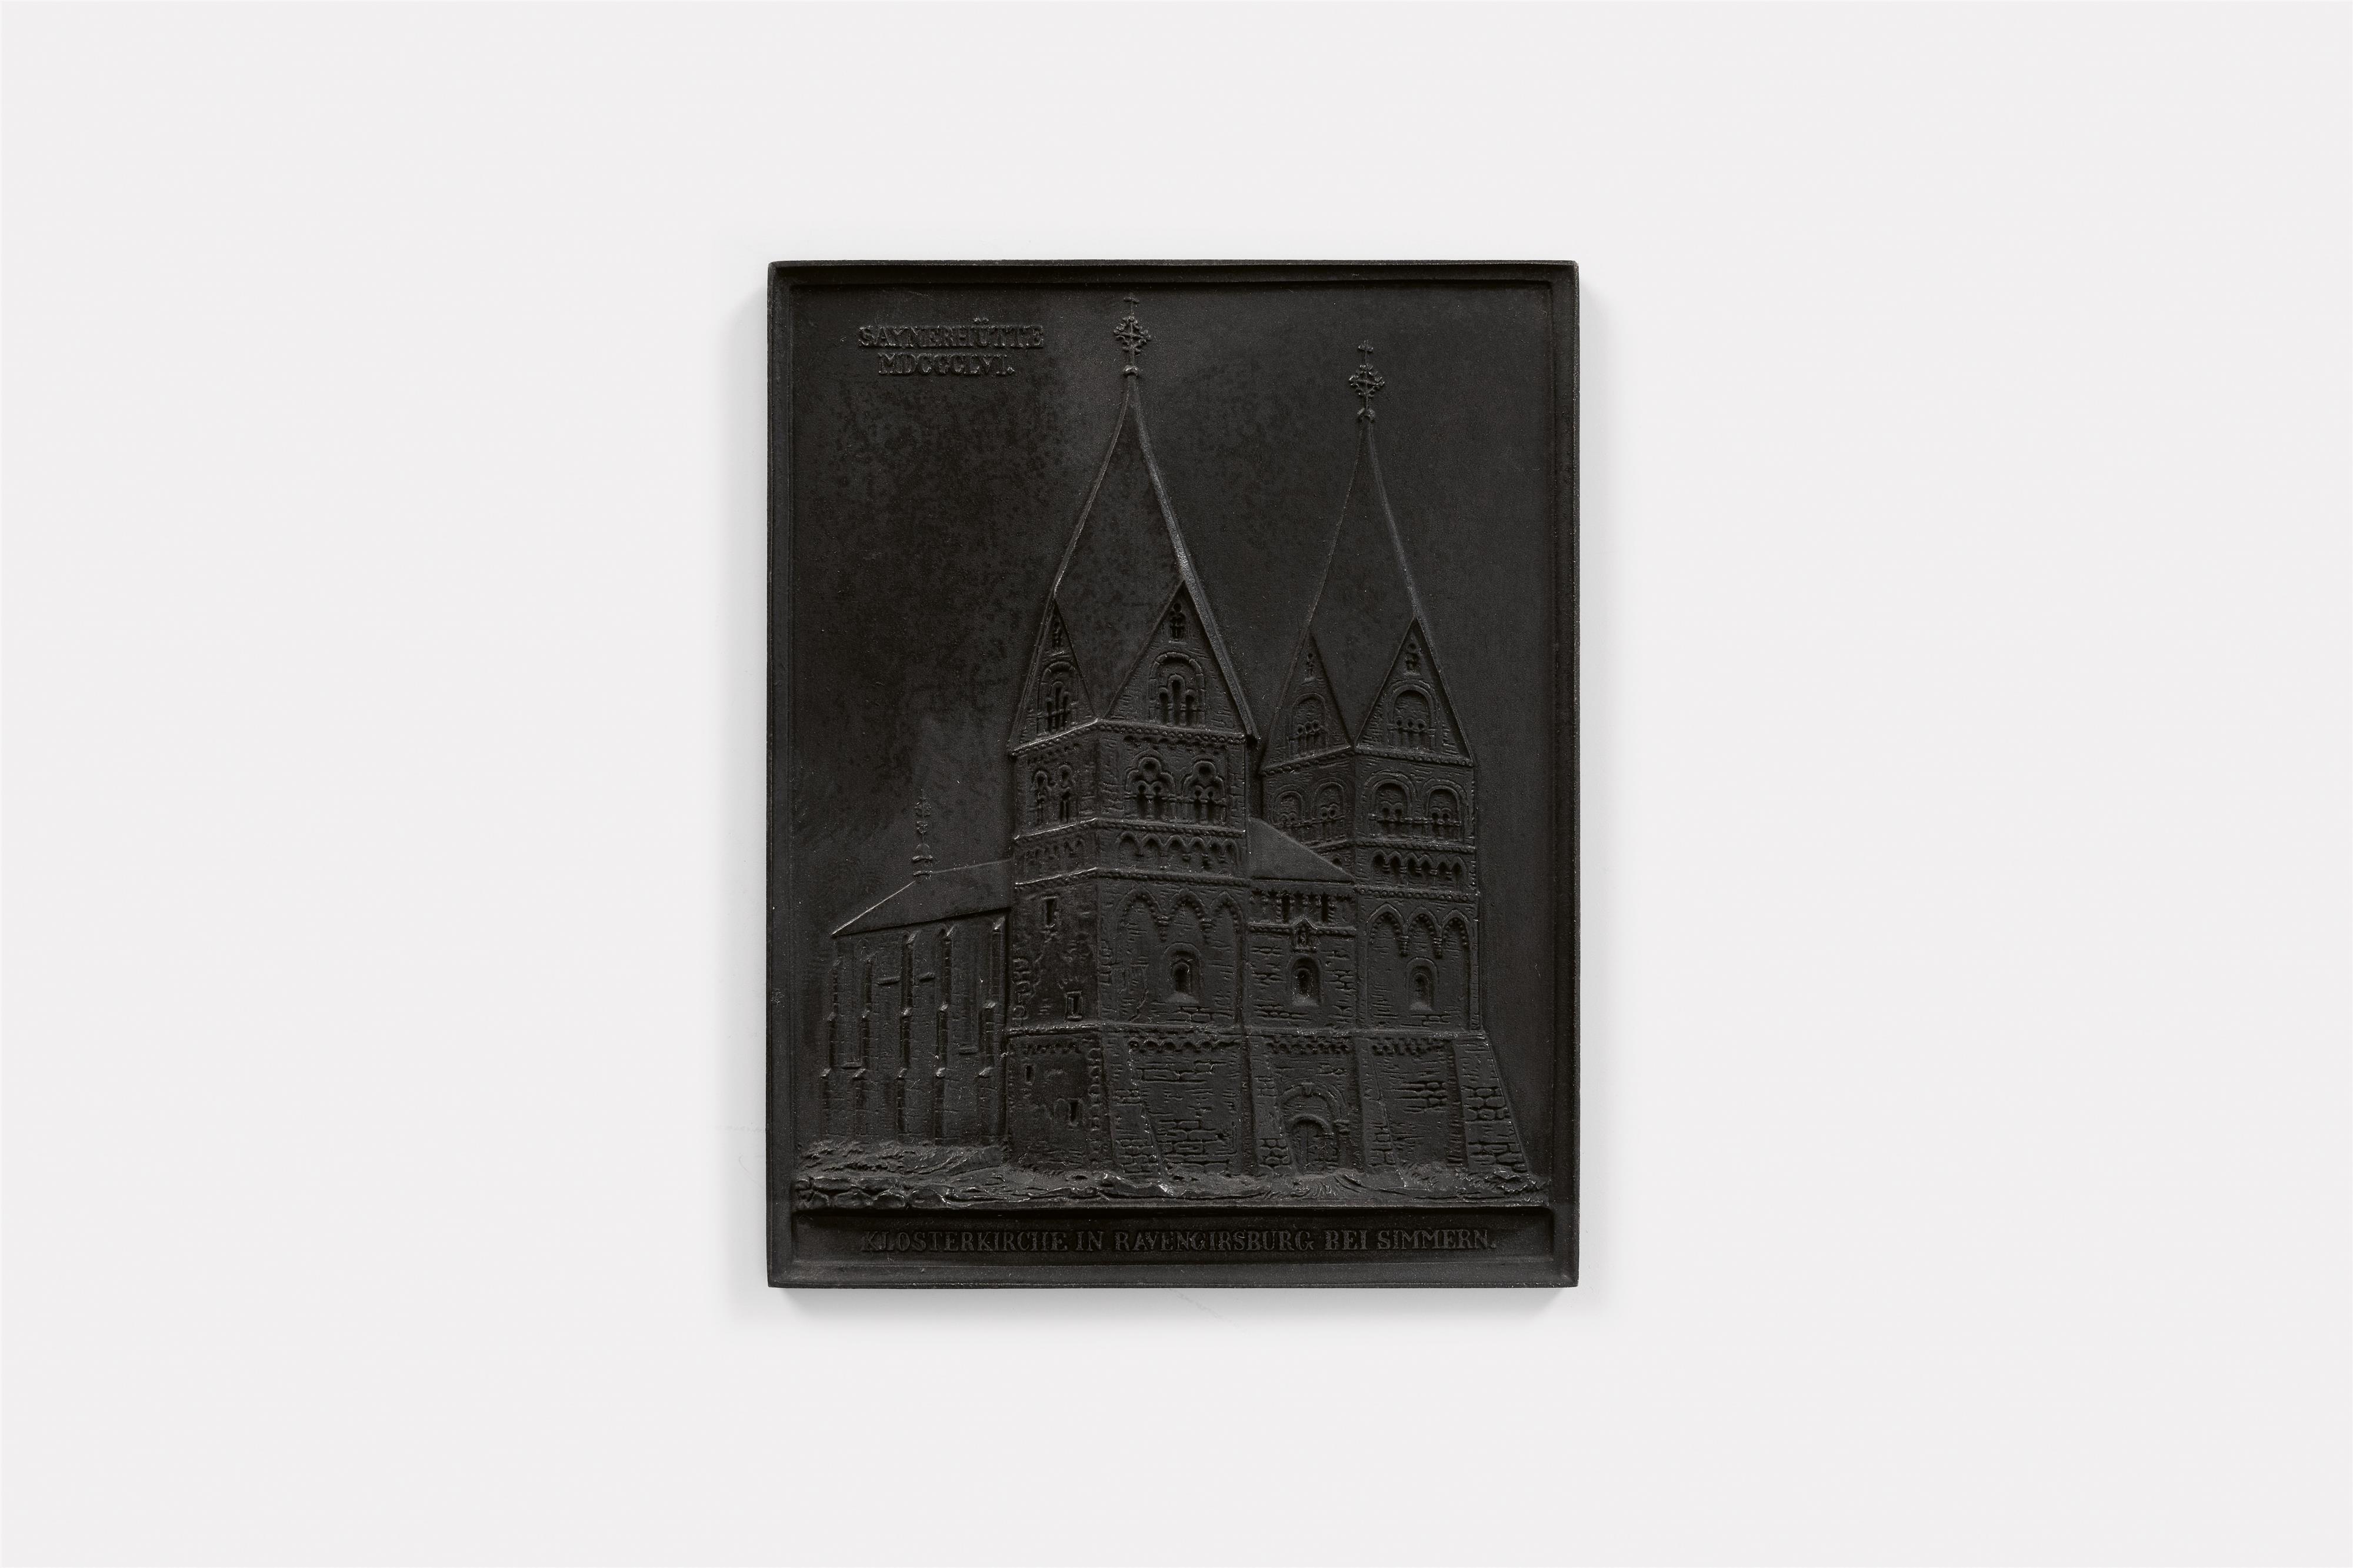 A cast iron New Year's plaque inscribed "KLOSTERKIRCHE IN RAVENGIRSBURG BEI SIMMERN" - image-1